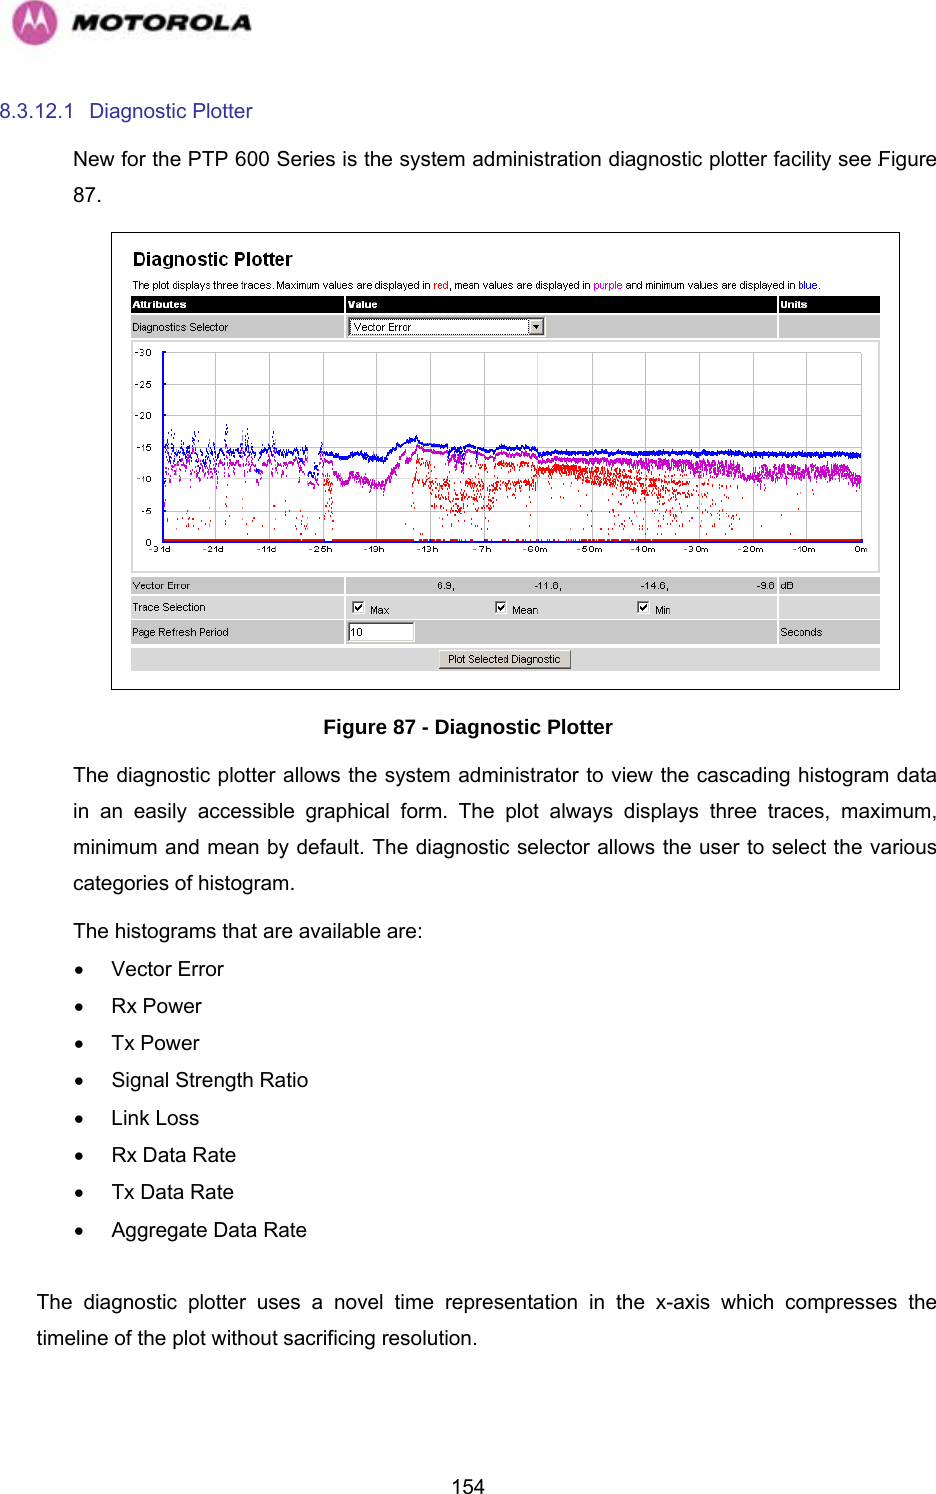   1548.3.12.1 Diagnostic Plotter New for the PTP 600 Series is the system administration diagnostic plotter facility see 1151HFigure 87.   Figure 87 - Diagnostic Plotter The diagnostic plotter allows the system administrator to view the cascading histogram data in an easily accessible graphical form. The plot always displays three traces, maximum, minimum and mean by default. The diagnostic selector allows the user to select the various categories of histogram. The histograms that are available are: • Vector Error • Rx Power • Tx Power •  Signal Strength Ratio • Link Loss •  Rx Data Rate •  Tx Data Rate •  Aggregate Data Rate  The diagnostic plotter uses a novel time representation in the x-axis which compresses the timeline of the plot without sacrificing resolution.  